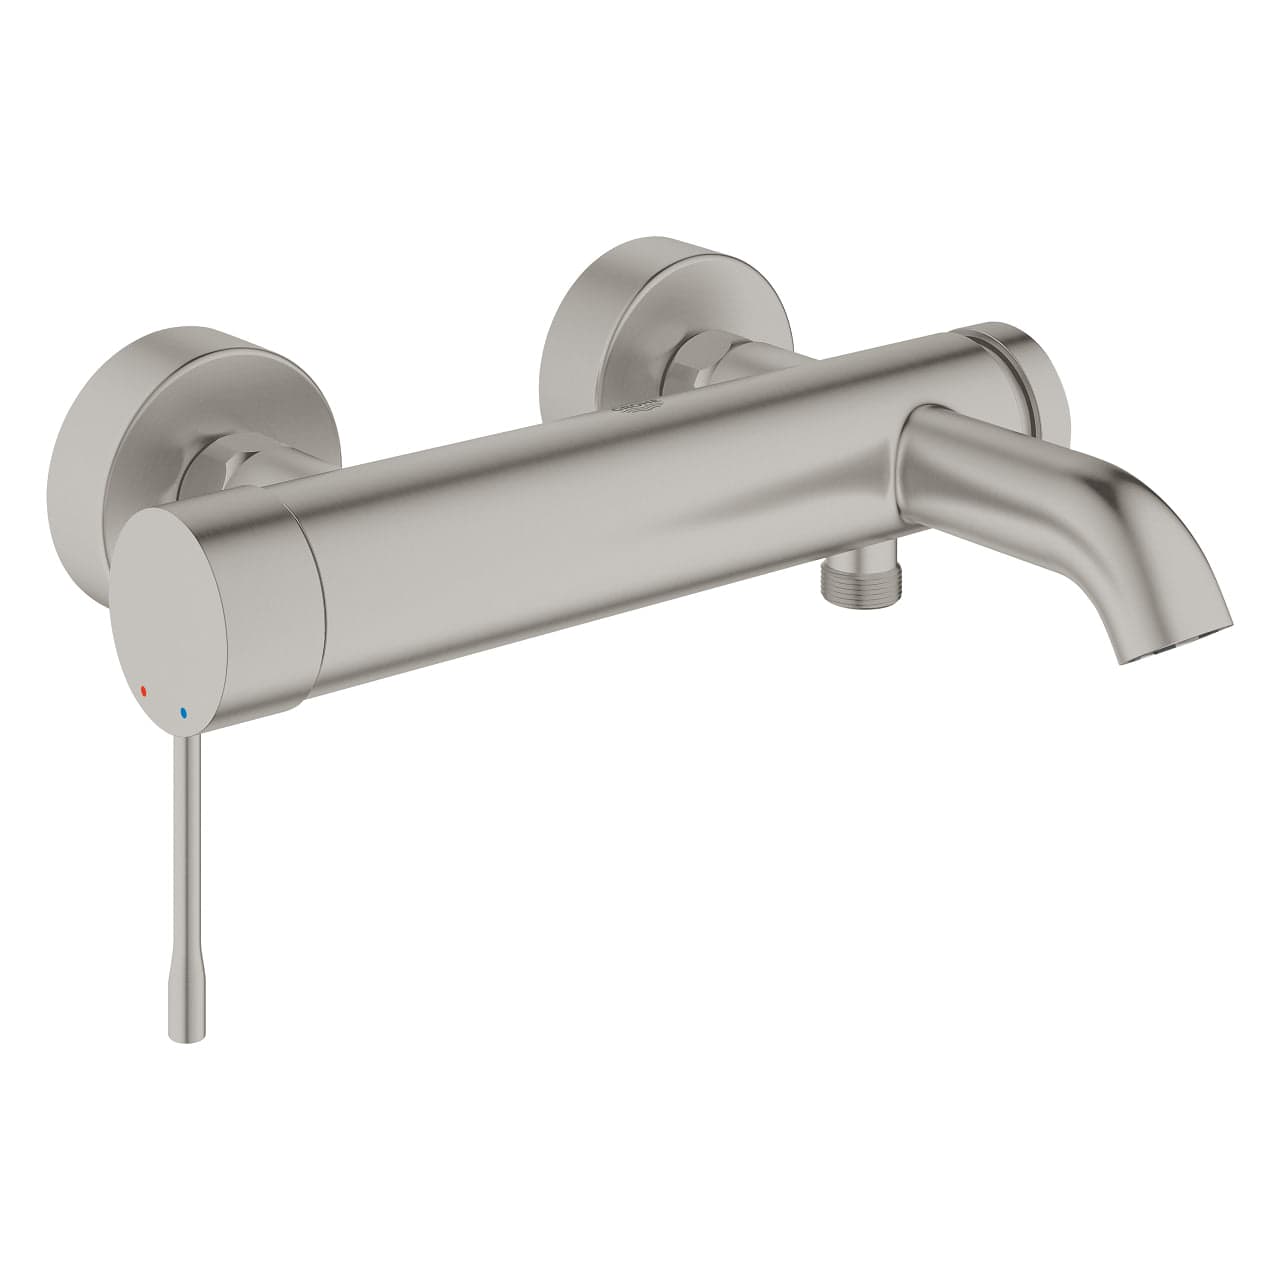 Grohe Essence Single-lever Bath & Shower Mixer 1/2″, Supersteel | Supply Master | Accra, Ghana Bathroom Faucet Buy Tools hardware Building materials